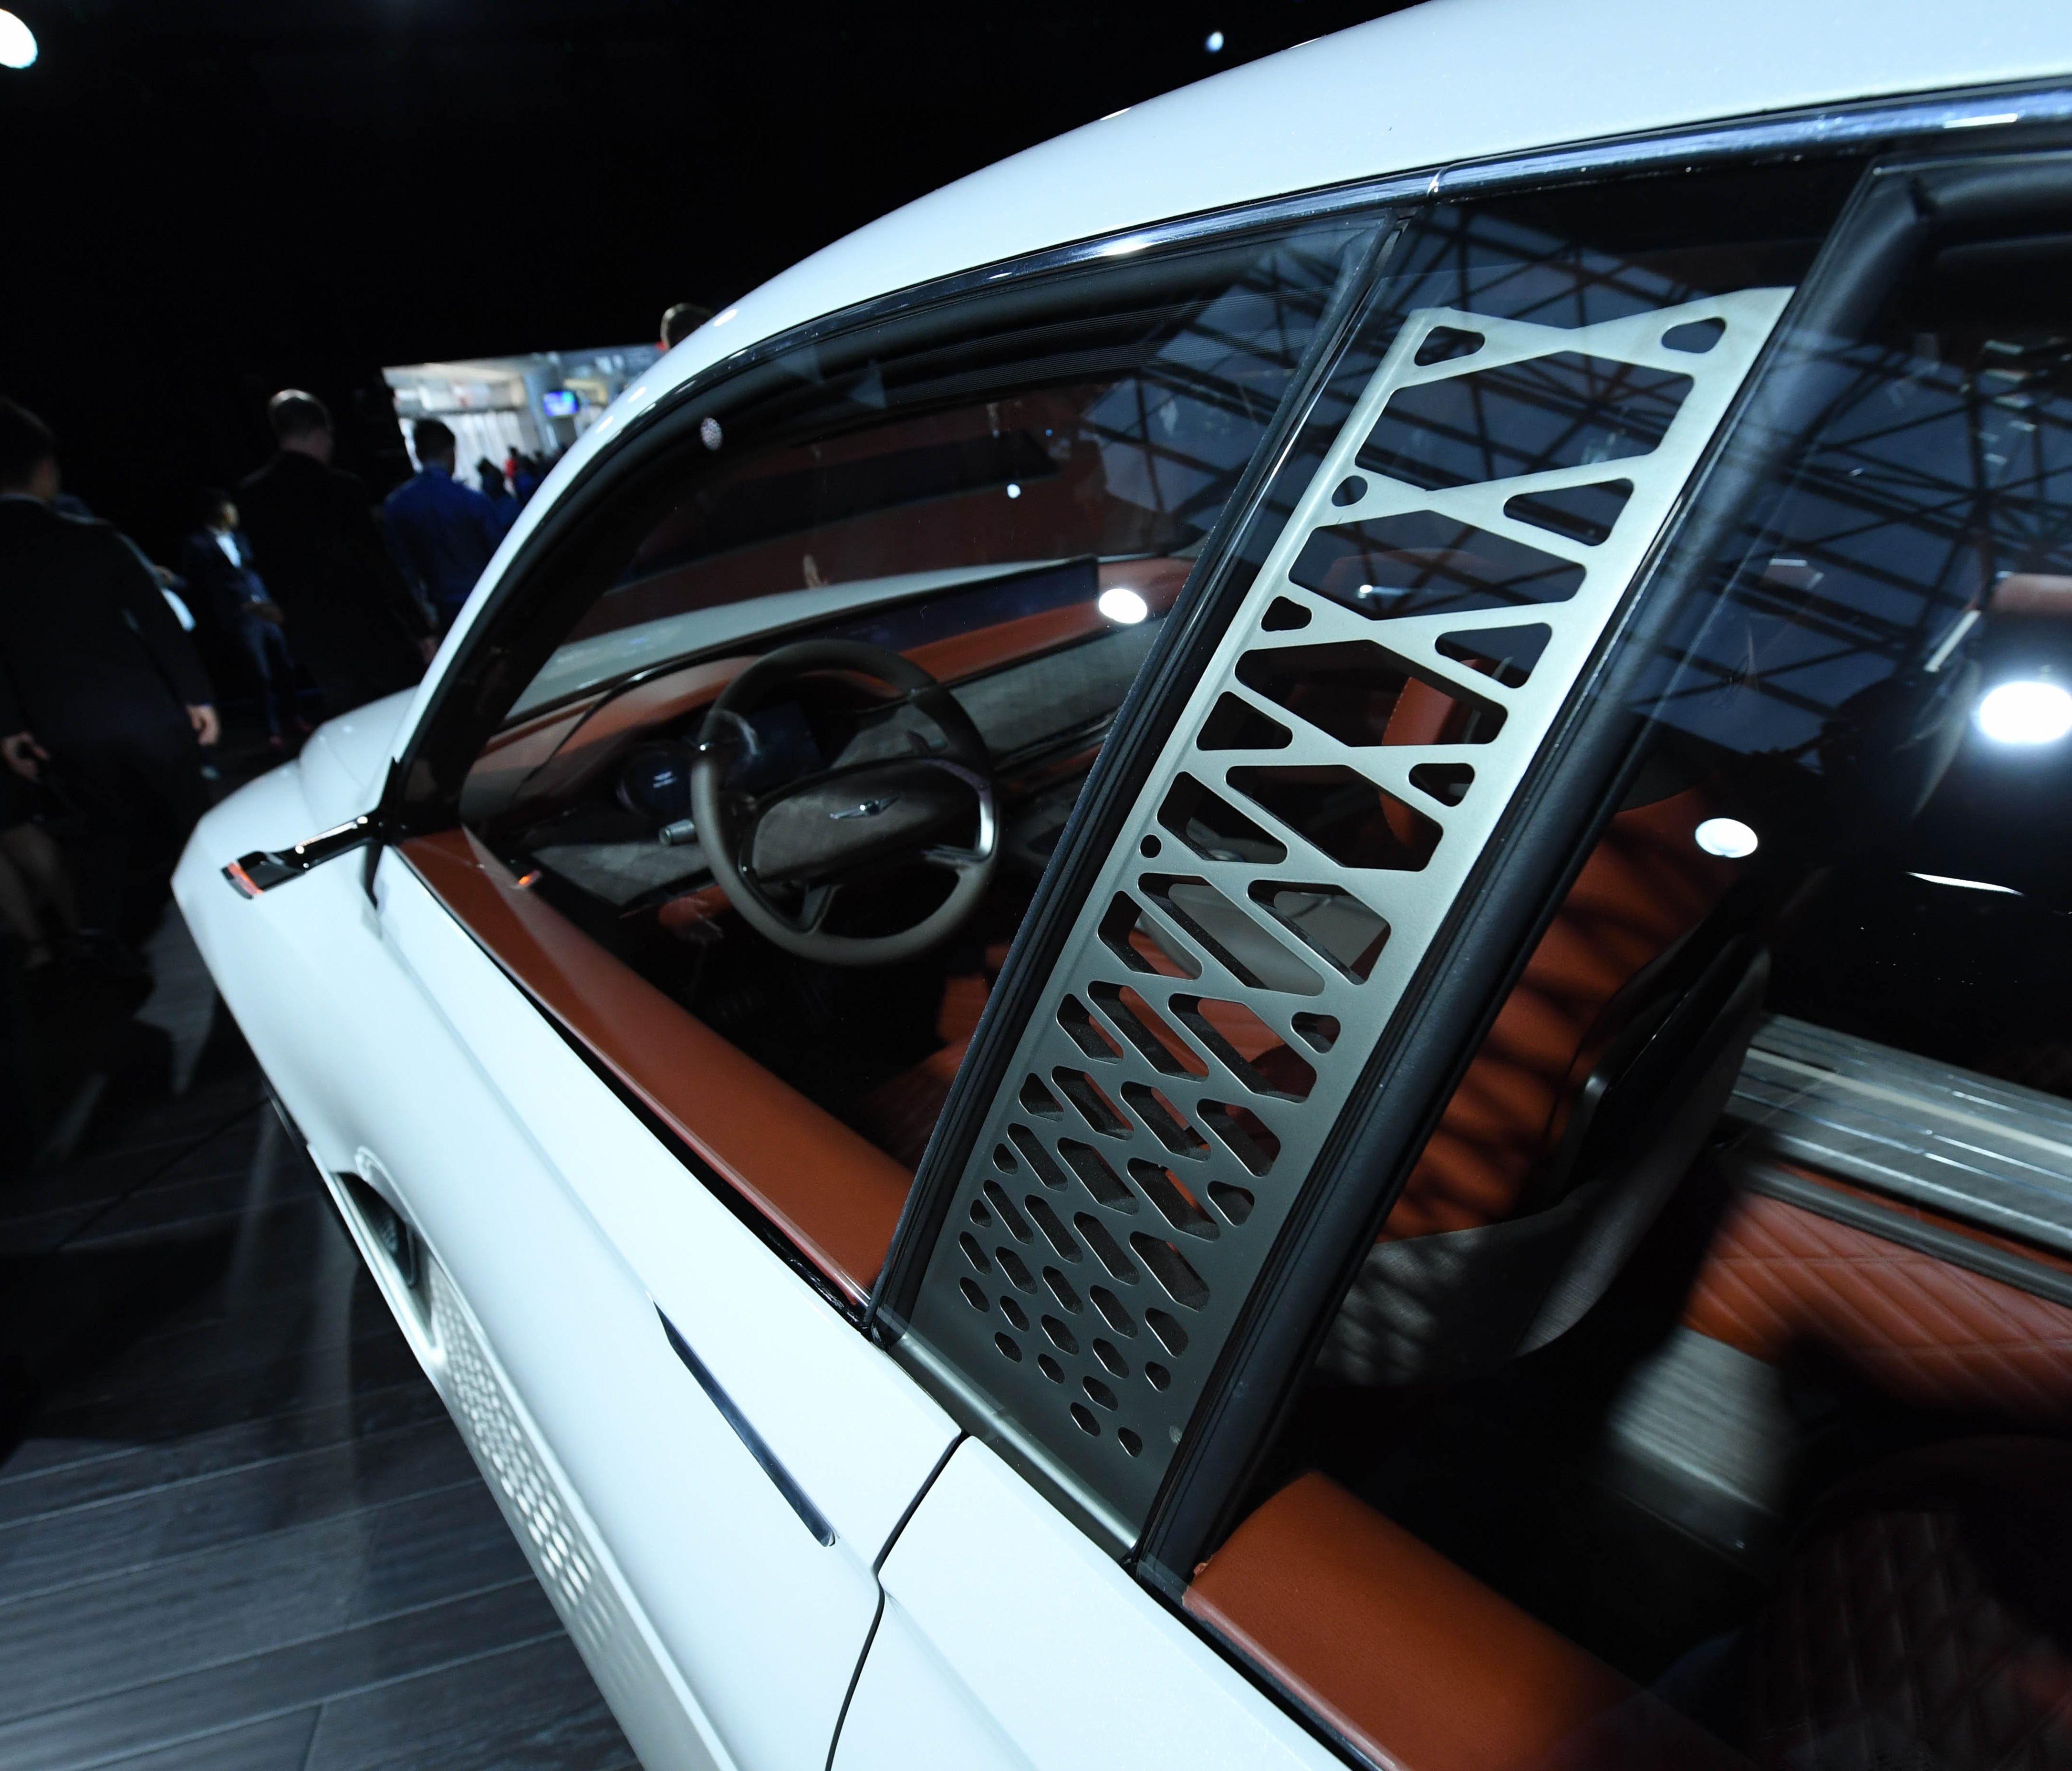 GV-80, a concept car from Genesis ,during the New York Auto Show.